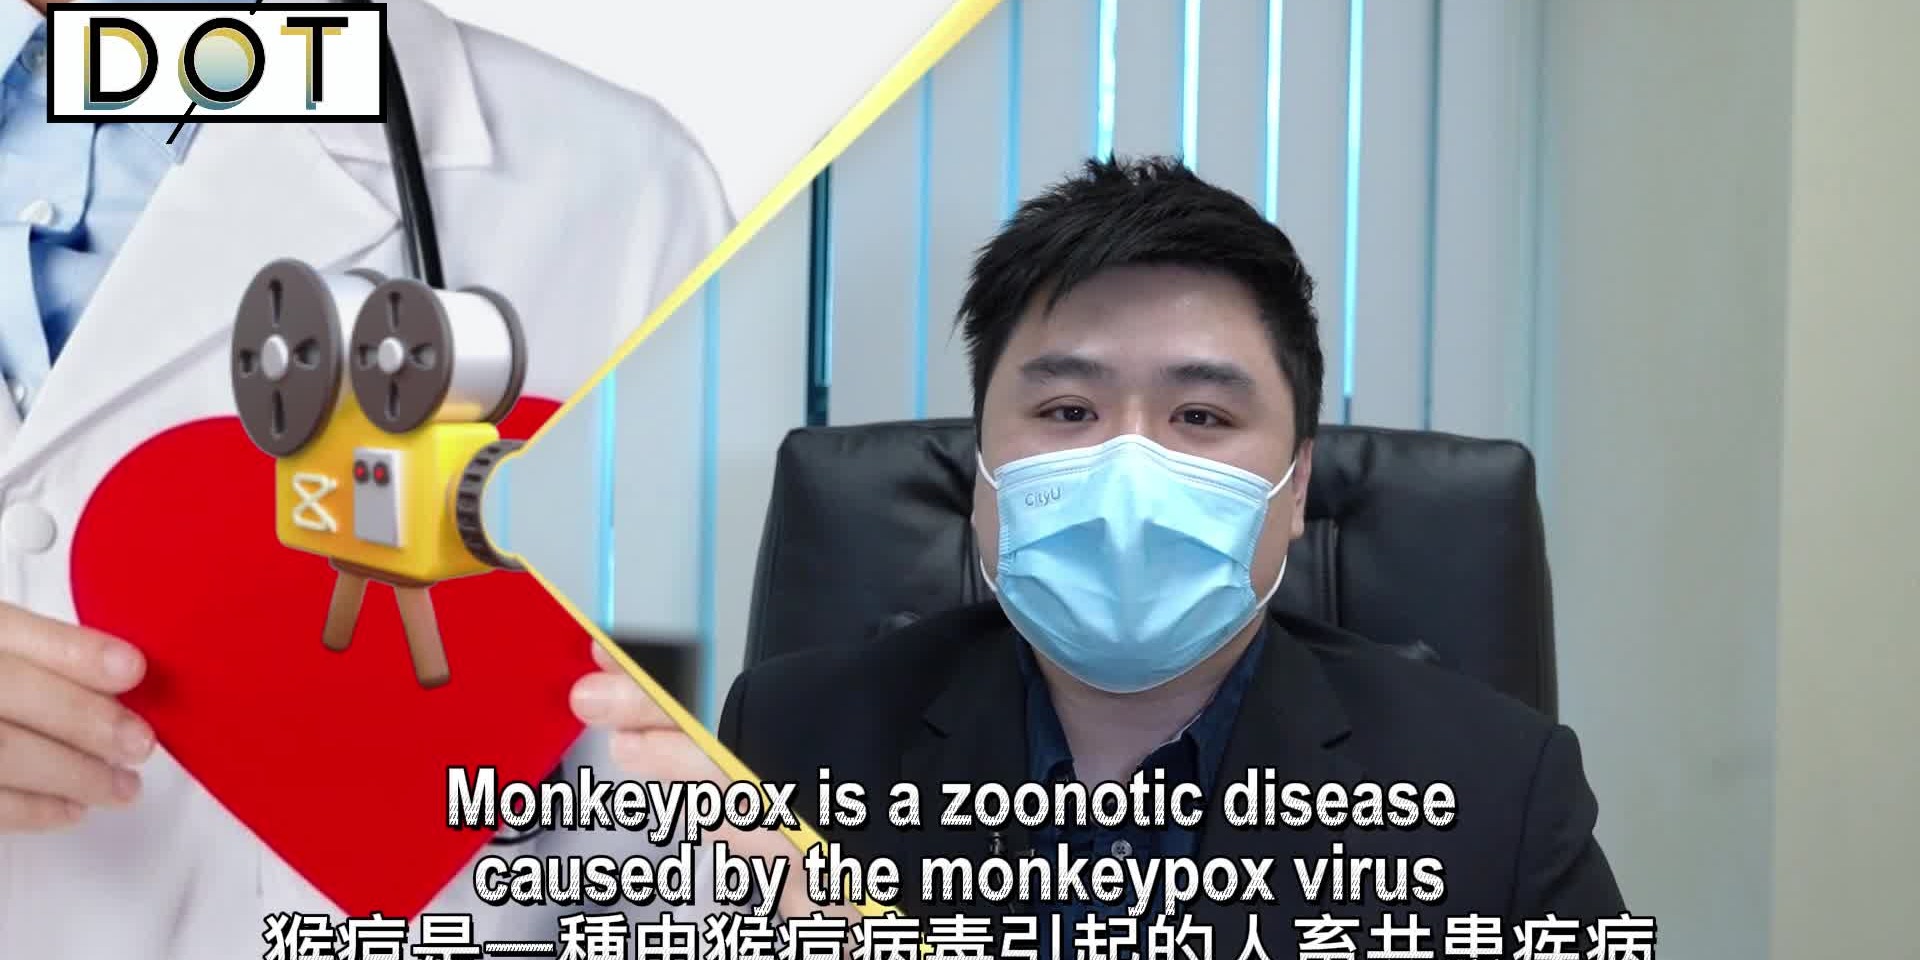 Met A Medic | Do HK people need large-scale vaccination against monkeypox?